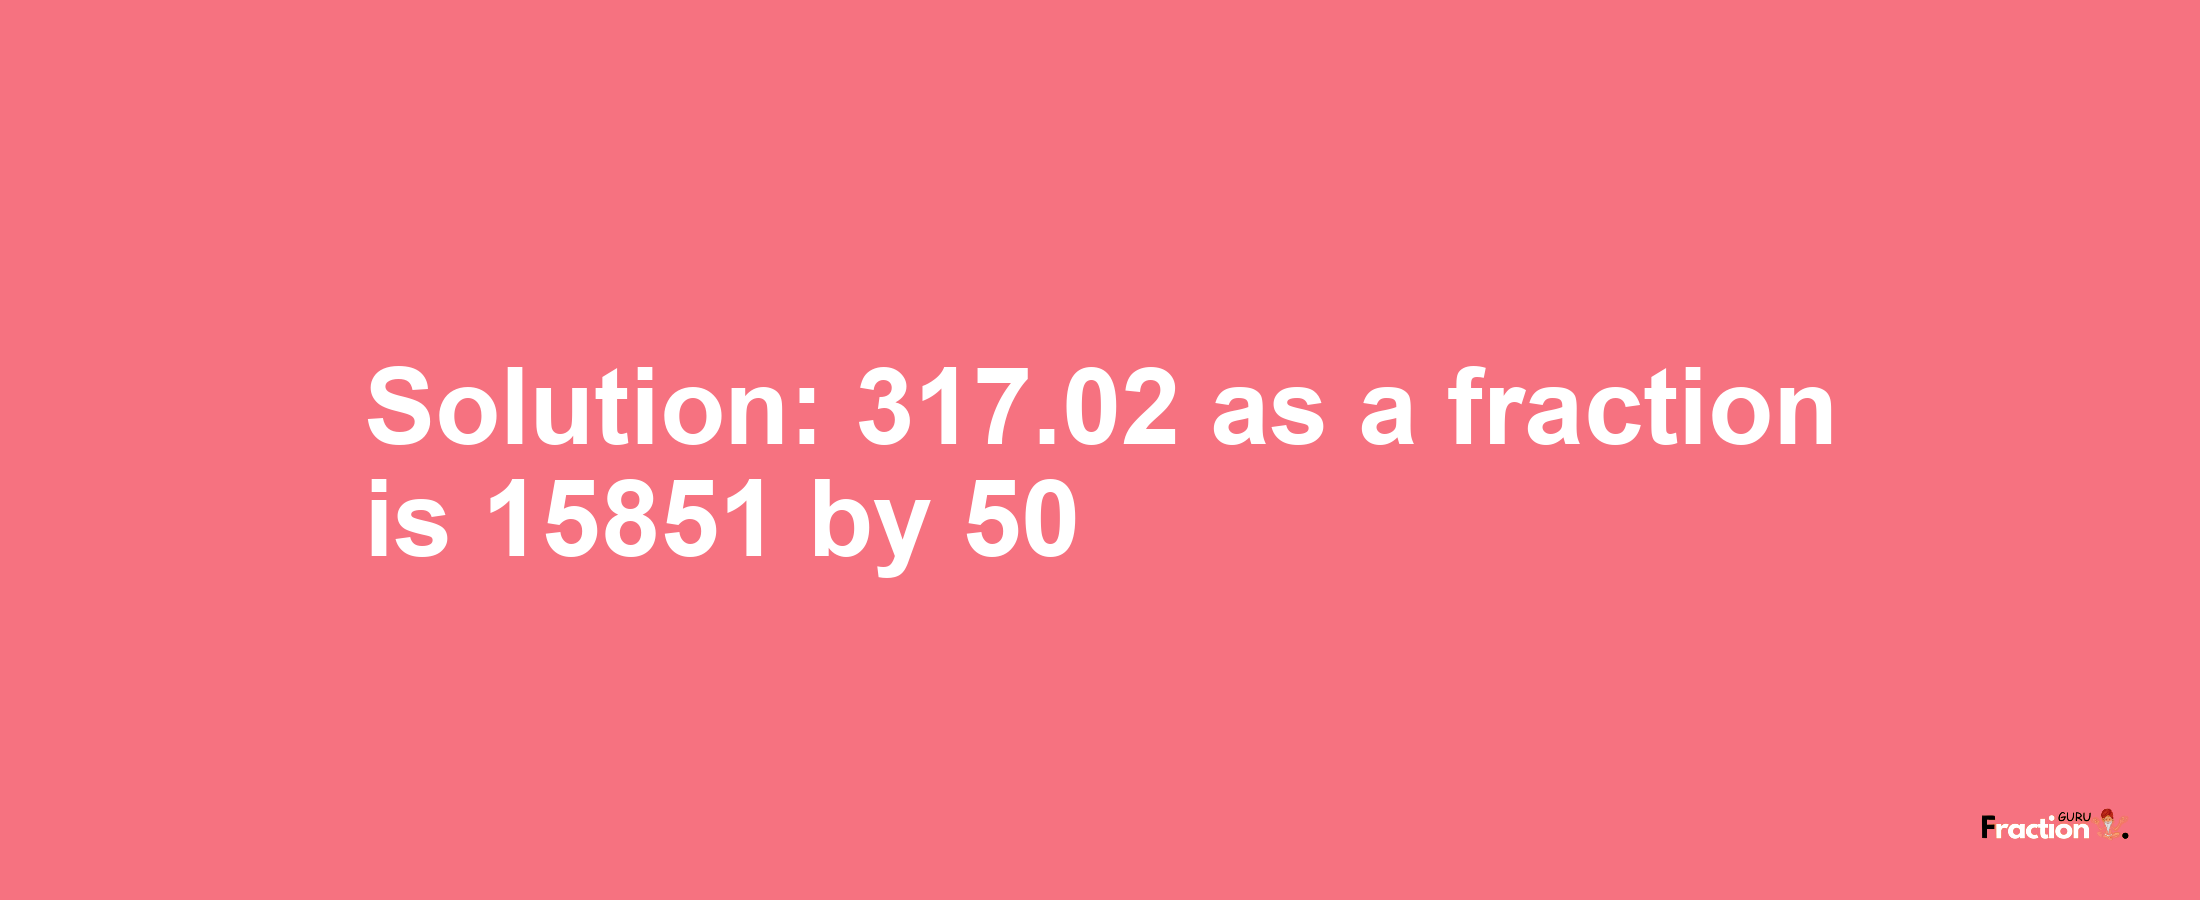 Solution:317.02 as a fraction is 15851/50